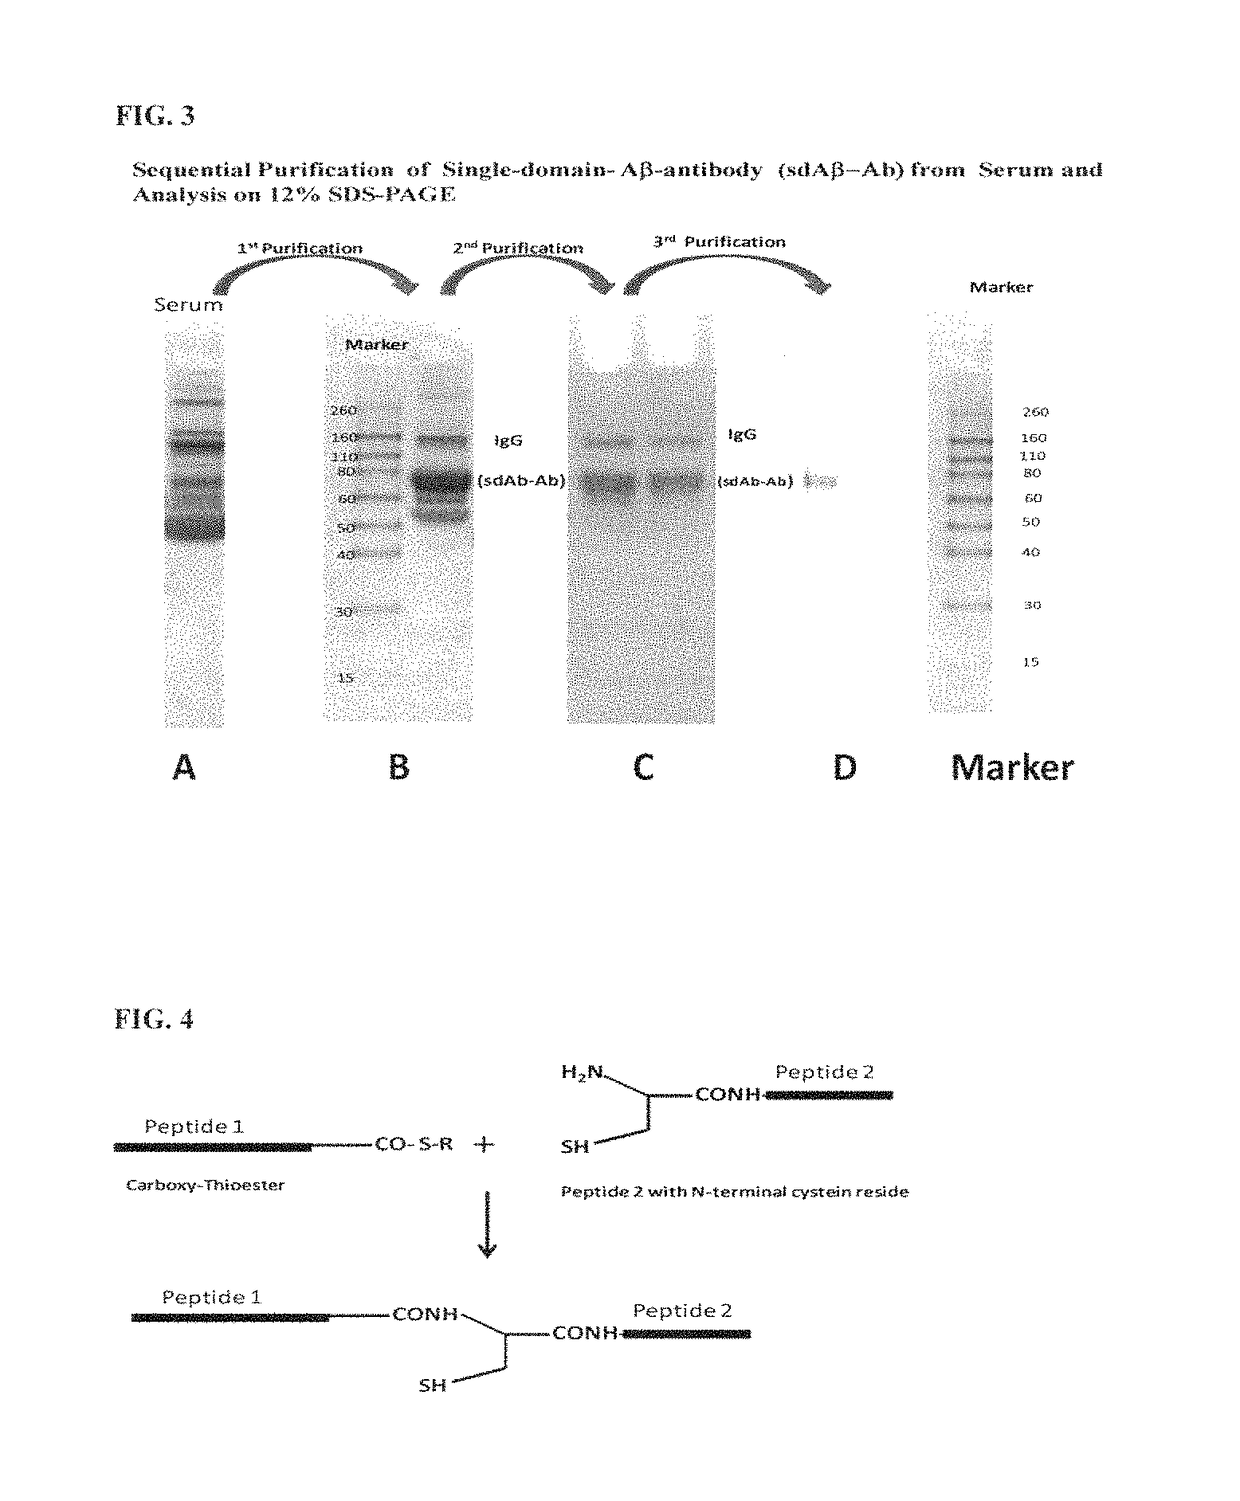 Methods of assessing amyloid-beta peptides in the central nervous system by blood-brain barrier permeable peptide compositions comprising a vab domain of a camelid single domain heavy chain antibody against an anti-amyloid-beta peptide